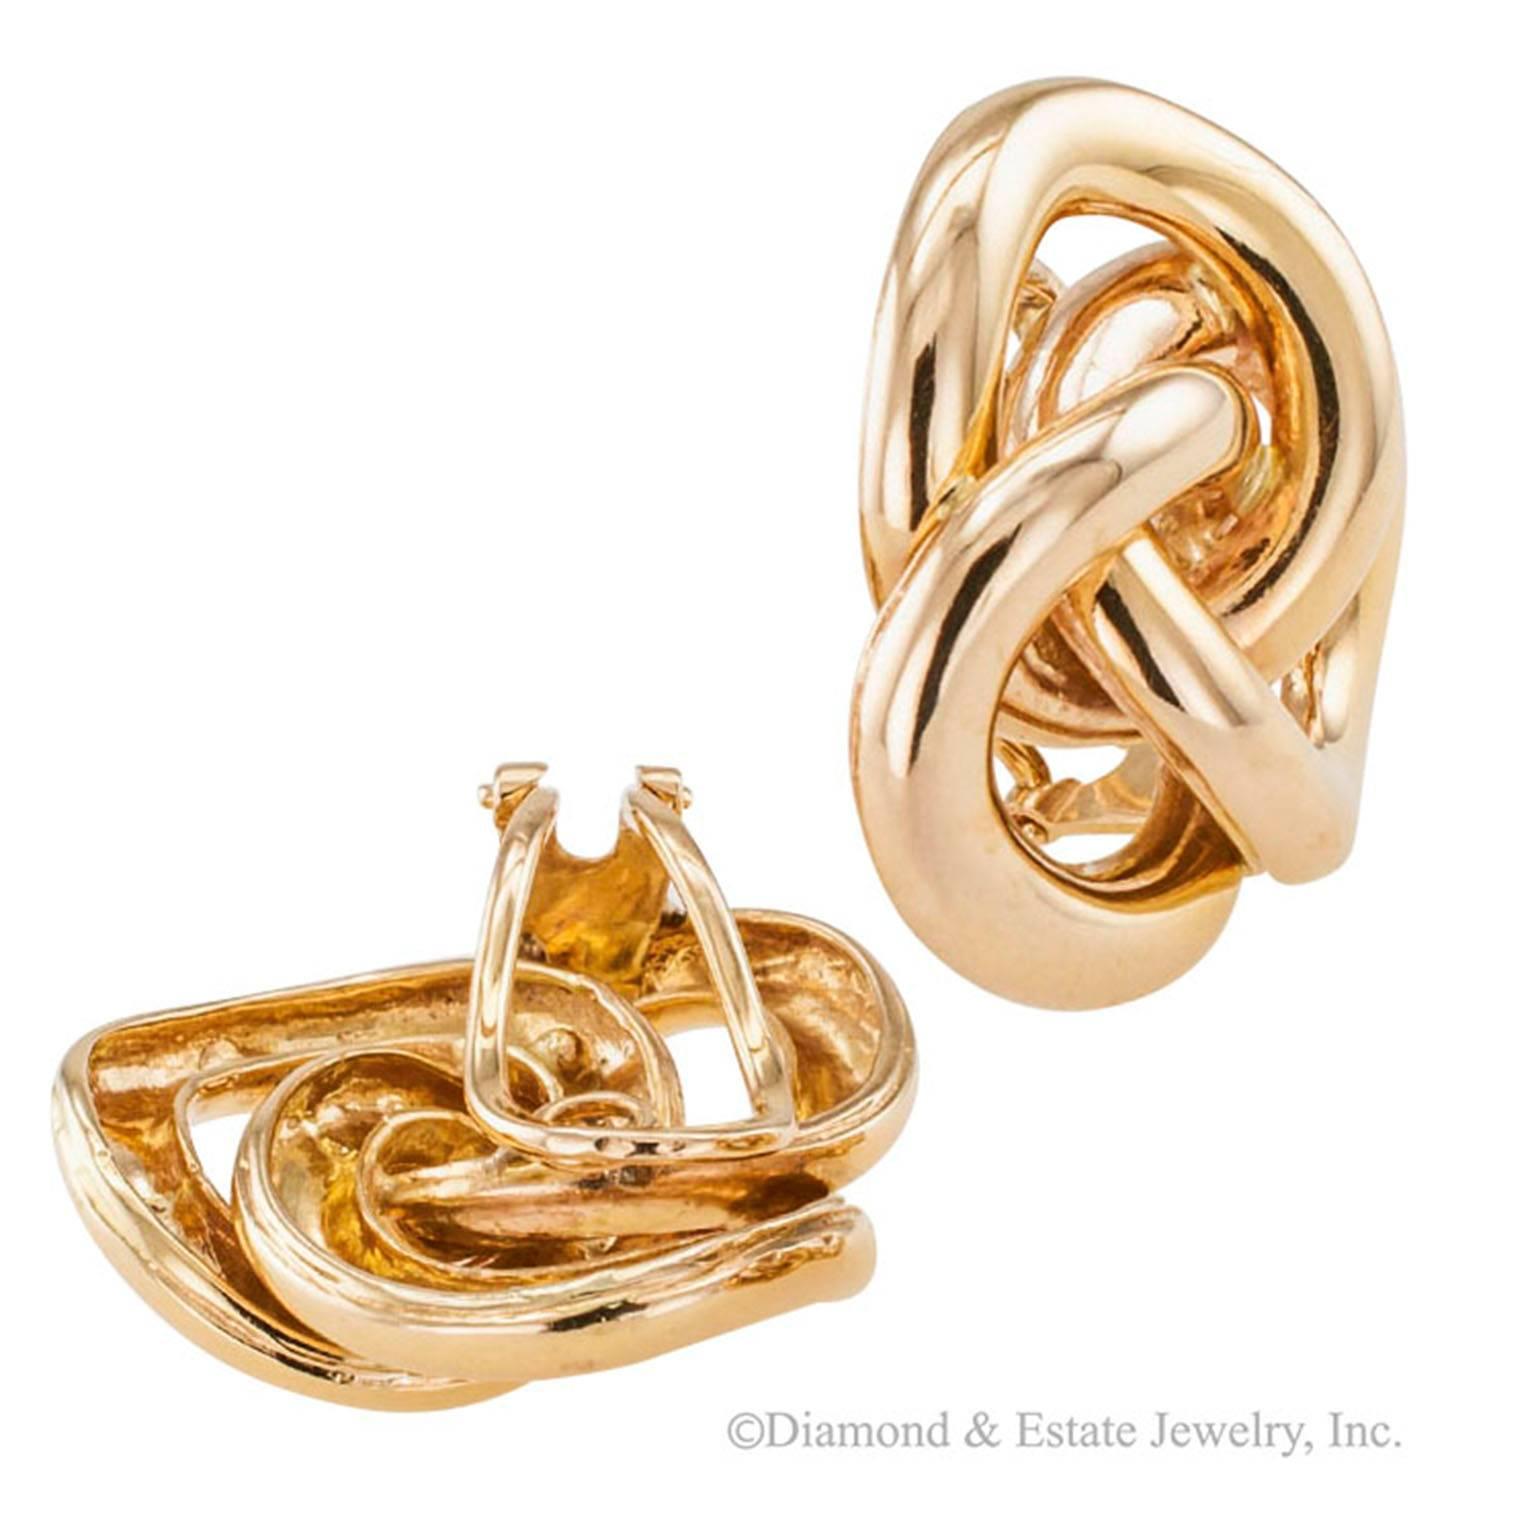 1960s Gold Knot Ear Clips

     Larger size gold knot ear clips circa 1960.  The classic knot design in this 14-karat yellow gold larger representation looks just as smart and sensible as can be, and the omega clips makes them very comfortable on